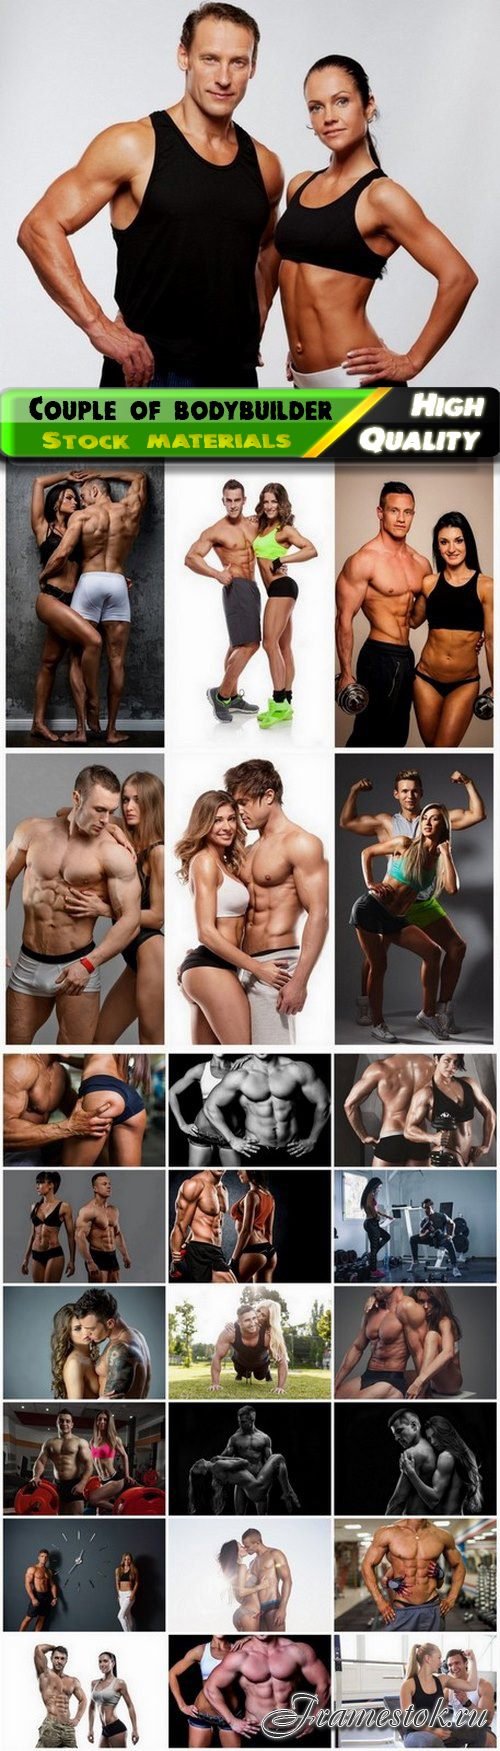 Sexy couple of bodybuilder with ideal body in gym - 25 HQ Jpg